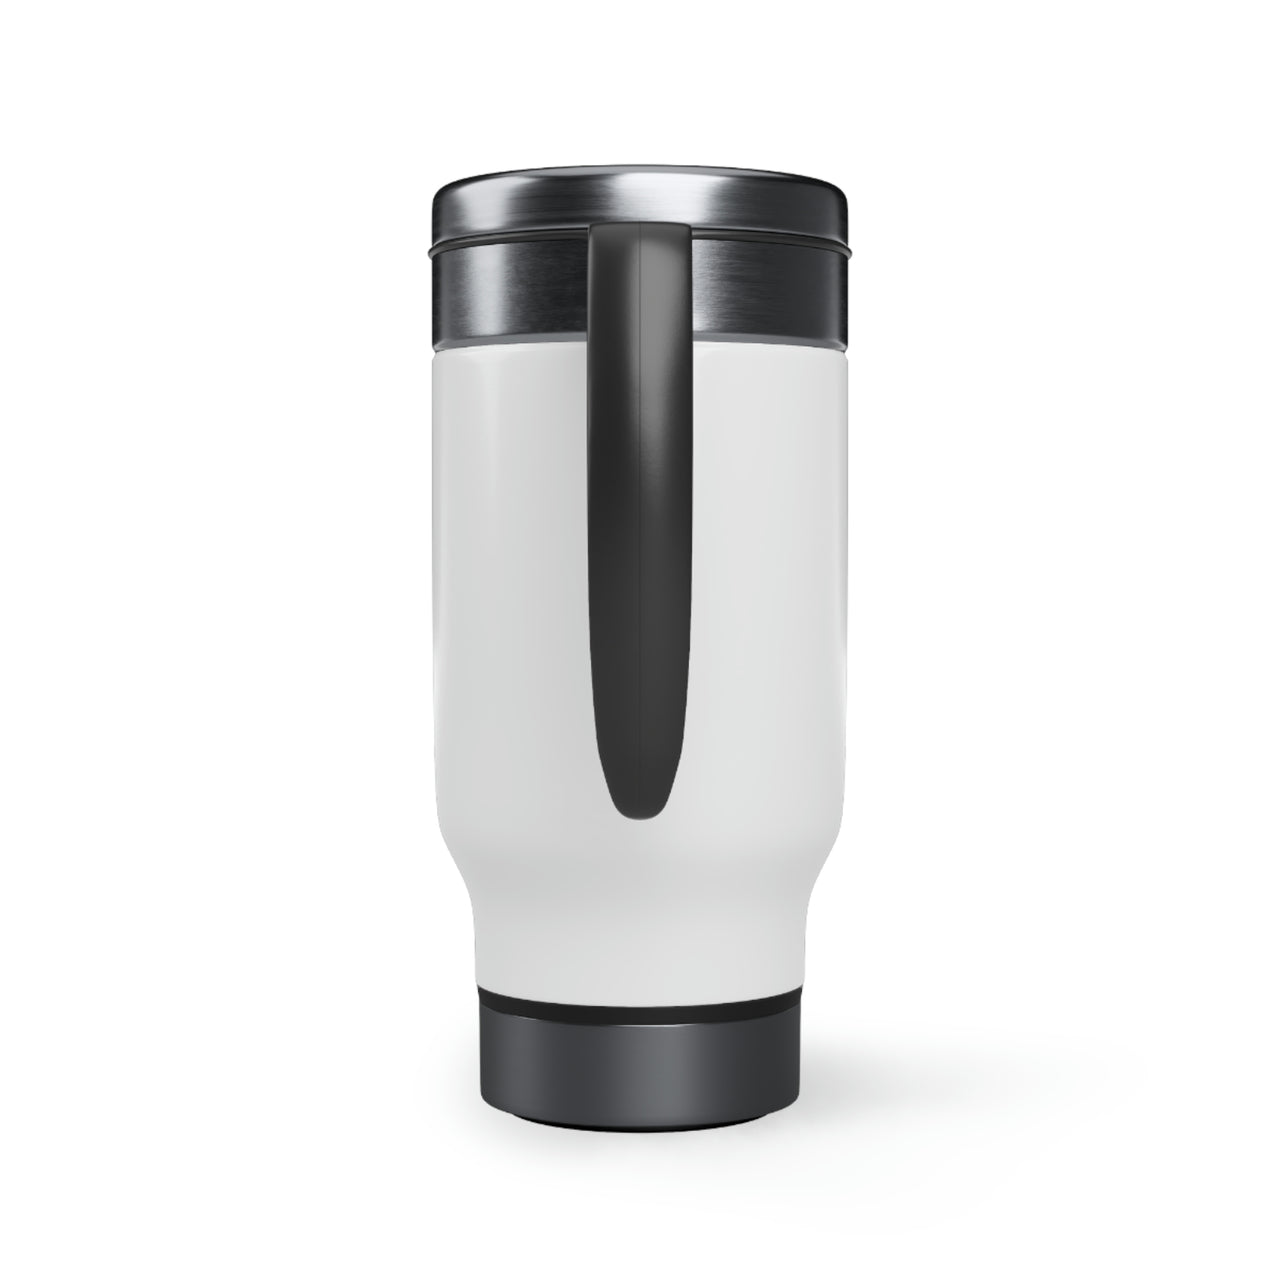 Real Madrid Stainless Steel Travel Mug with Handle, 14oz